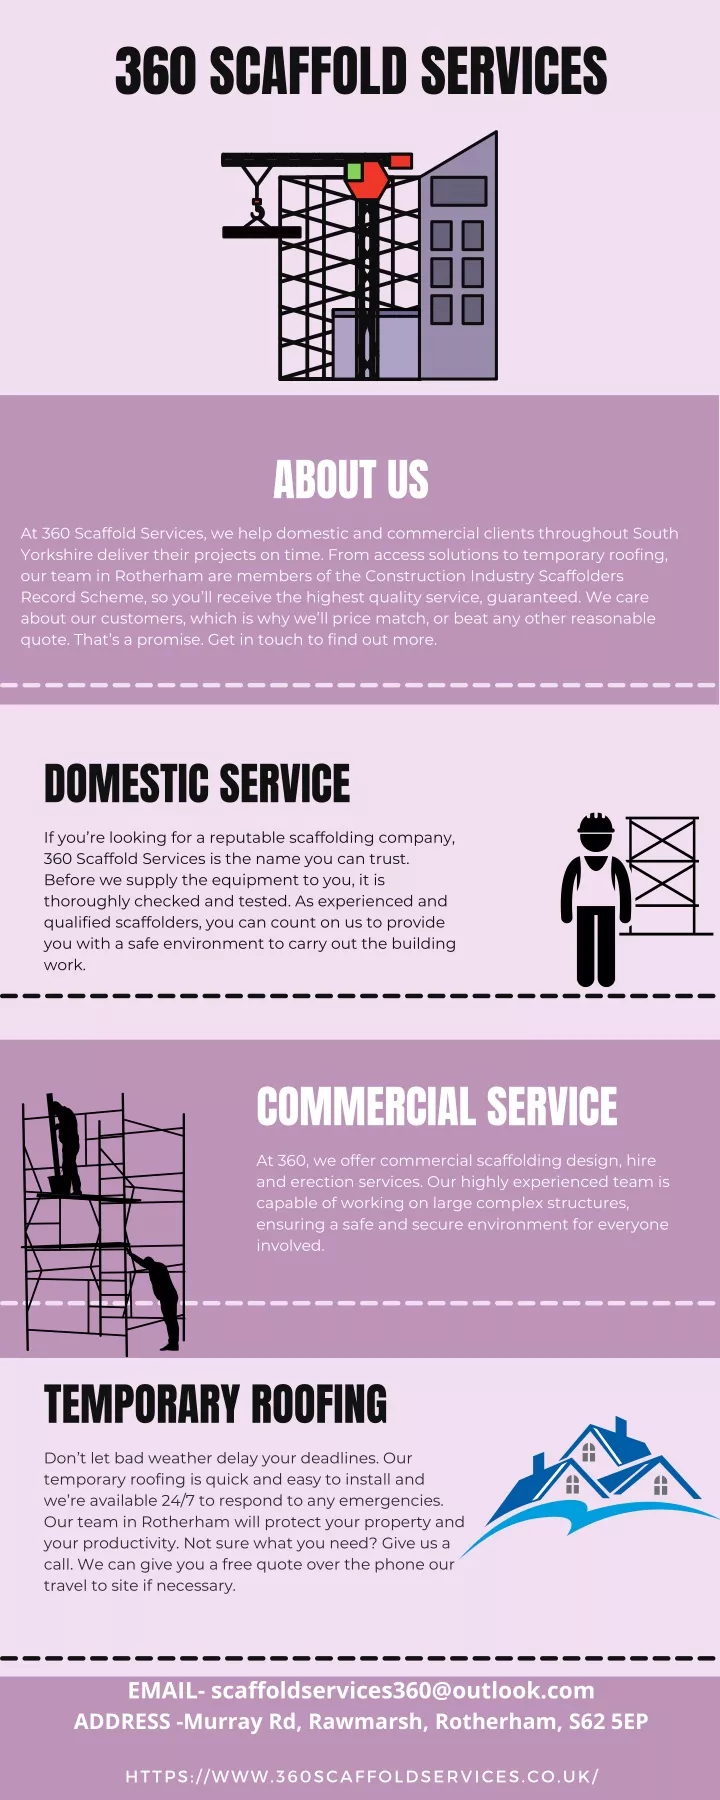 360 scaffold services